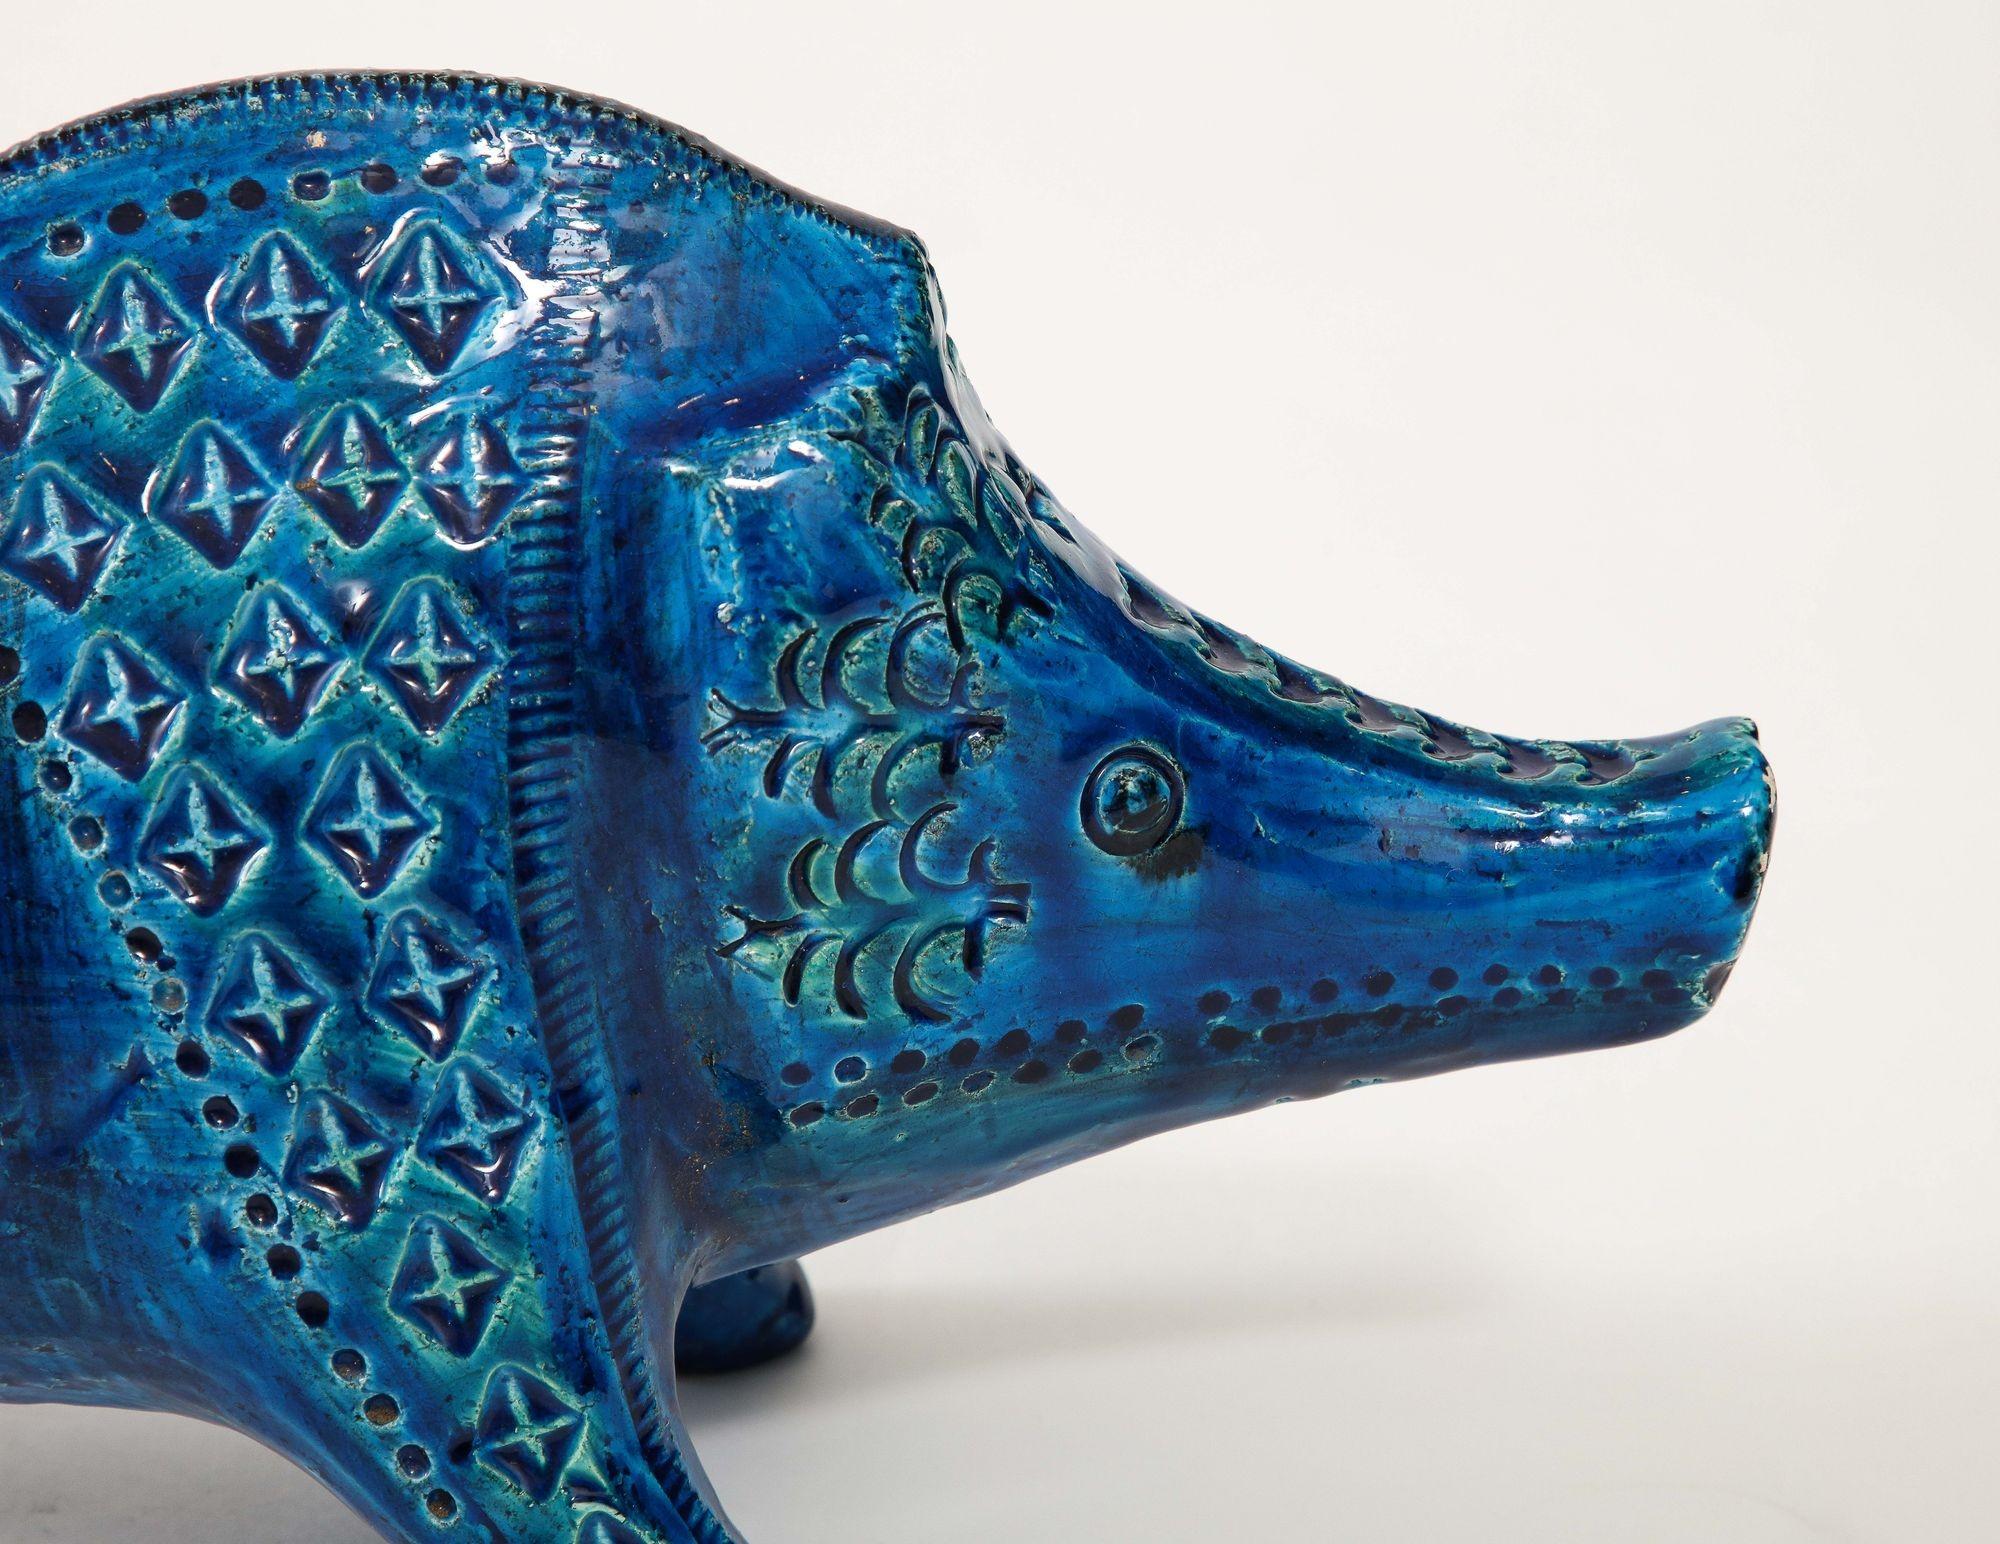 Aldo Londi's Ceramic Boar, created for Bitossi in the enchanting 'Rimini blue' glaze circa 1960, is a stunning representation of Italian ceramic artistry. Crafted with meticulous attention to detail, this boar sculpture embodies the essence of